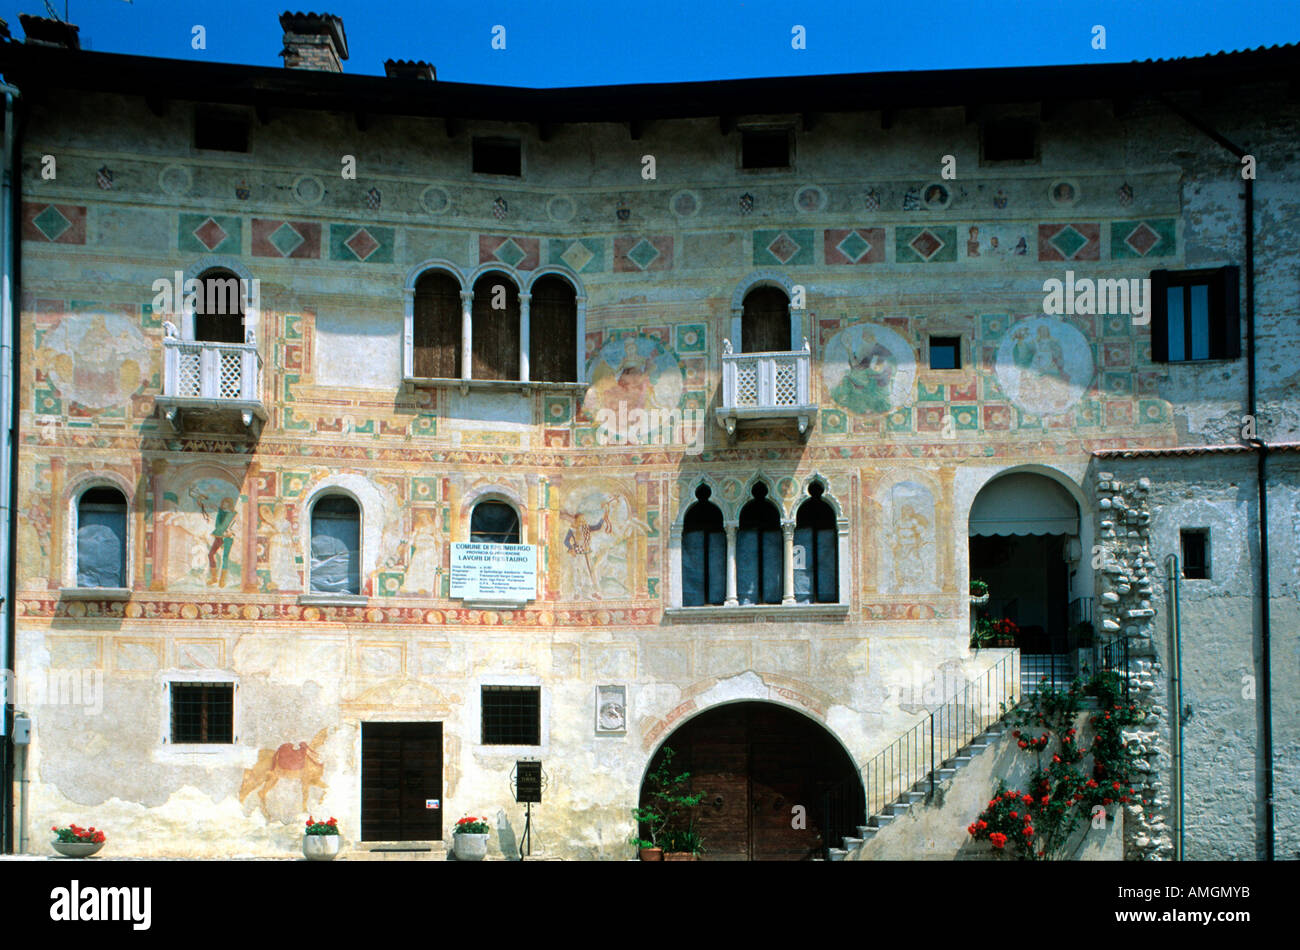 Palazzo Dipinto High Resolution Stock Photography and Images - Alamy